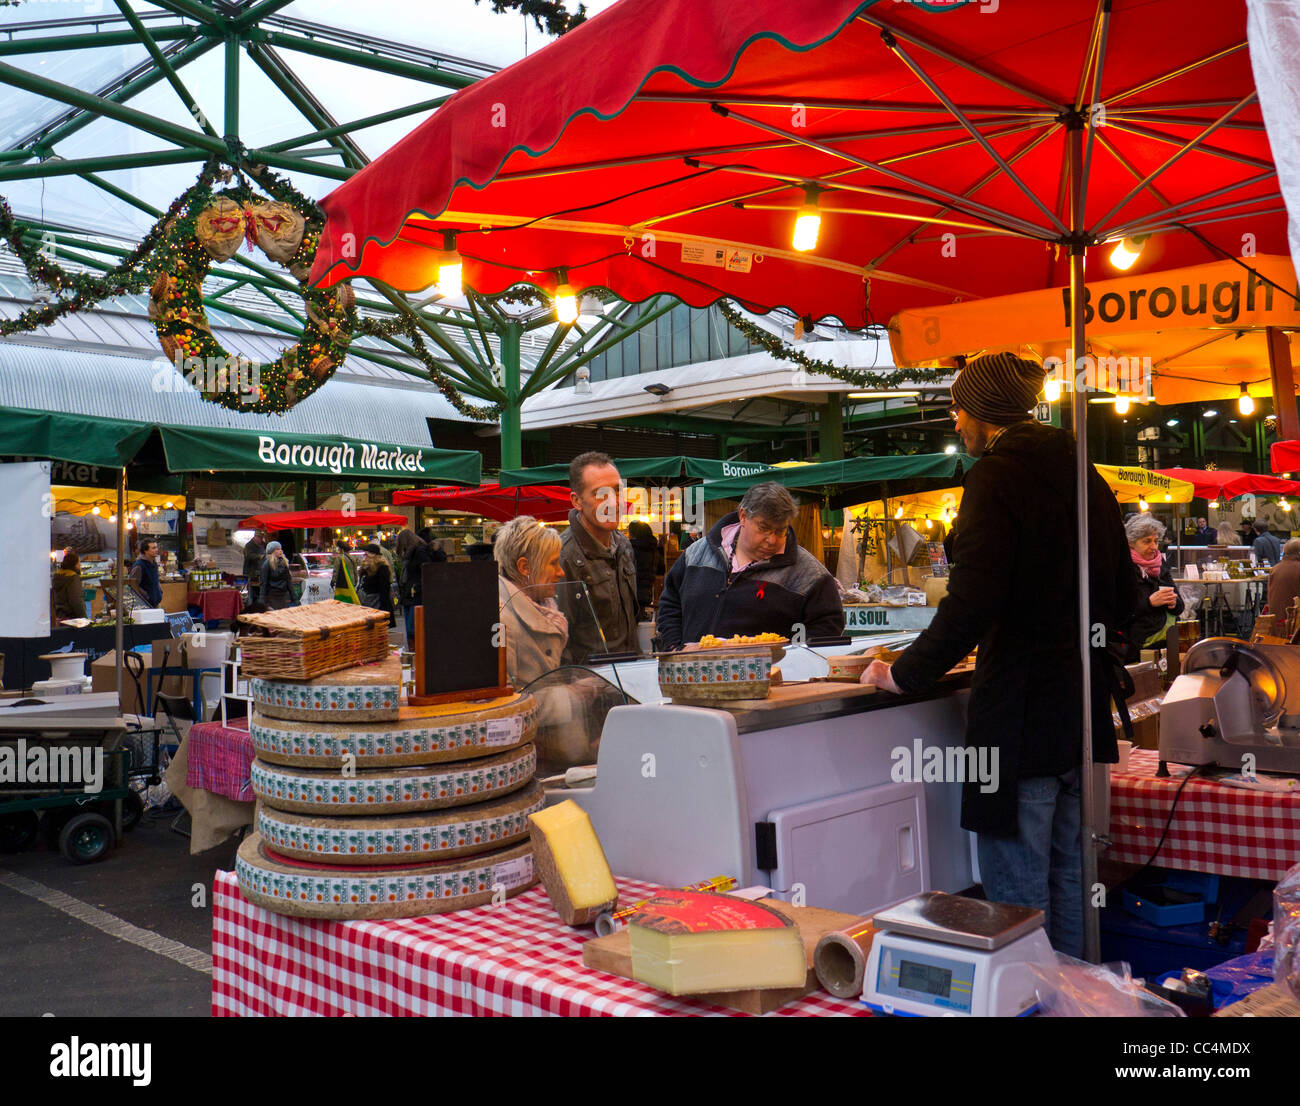 Cheese stall with samples at Borough Market with Christmas decorations Southwark London Stock Photo